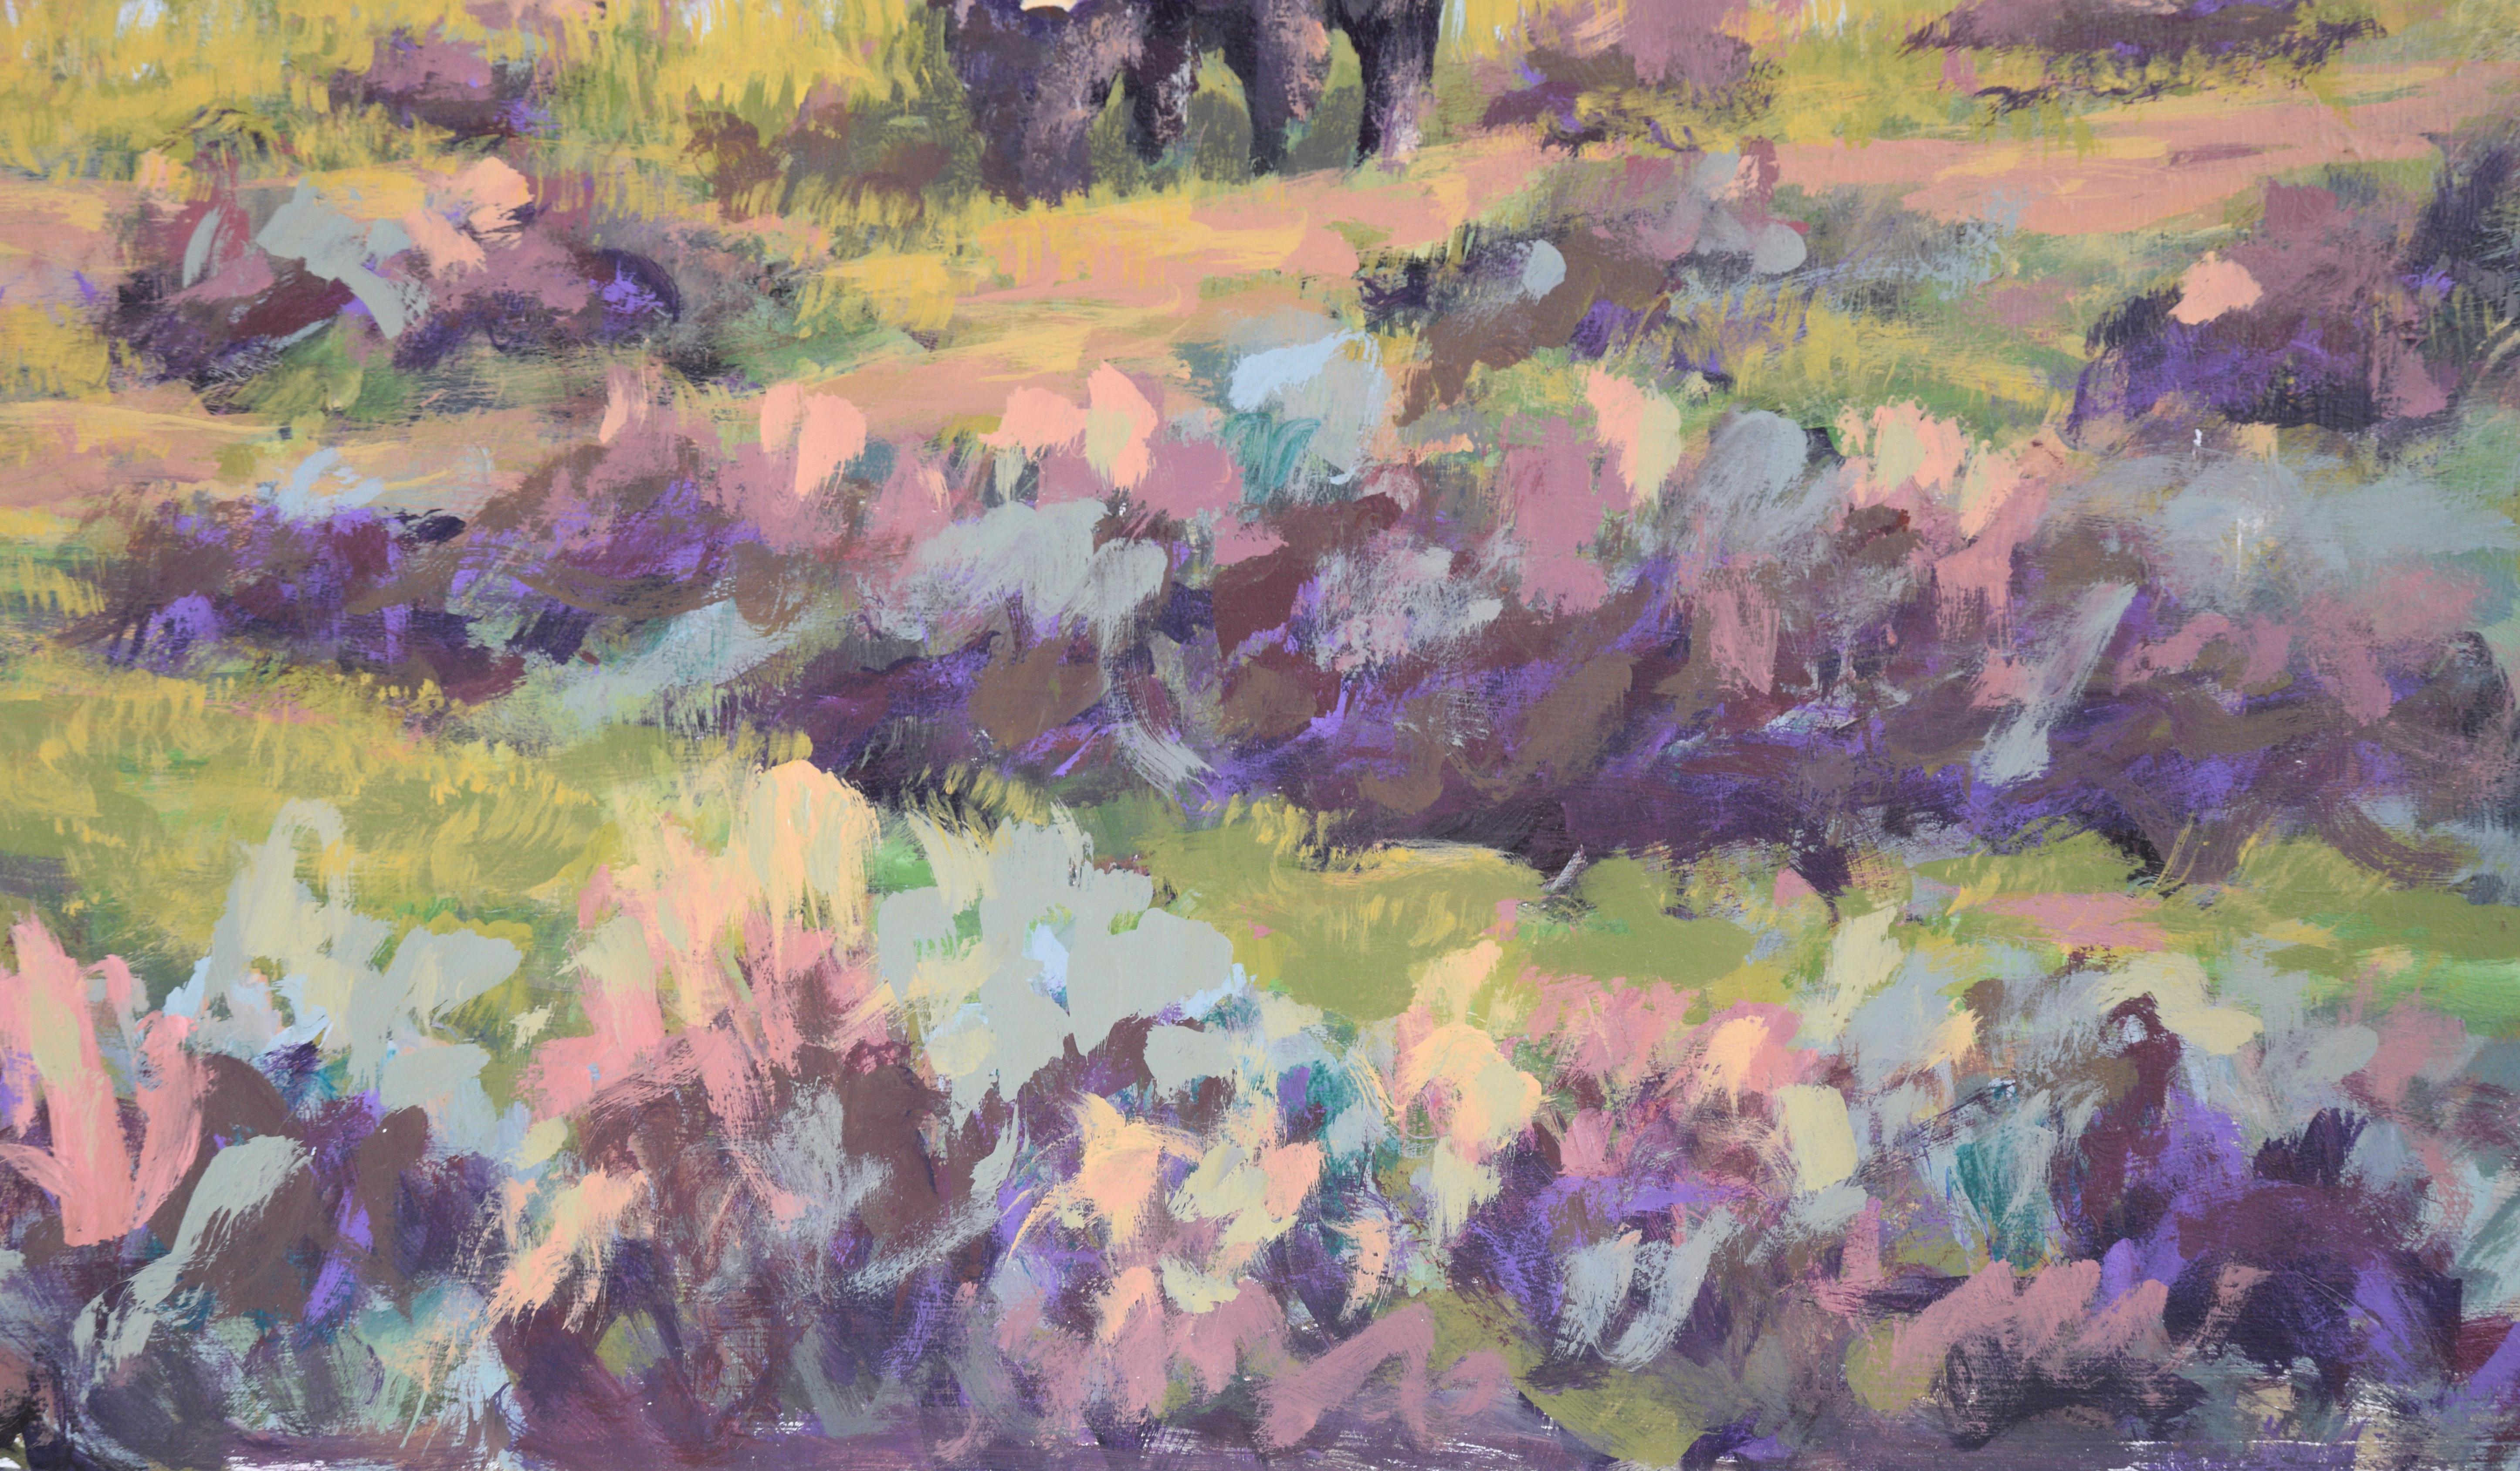 Bison in the Spring Thaw - Western Plein Aire Landscape in Acrylic on Board 5